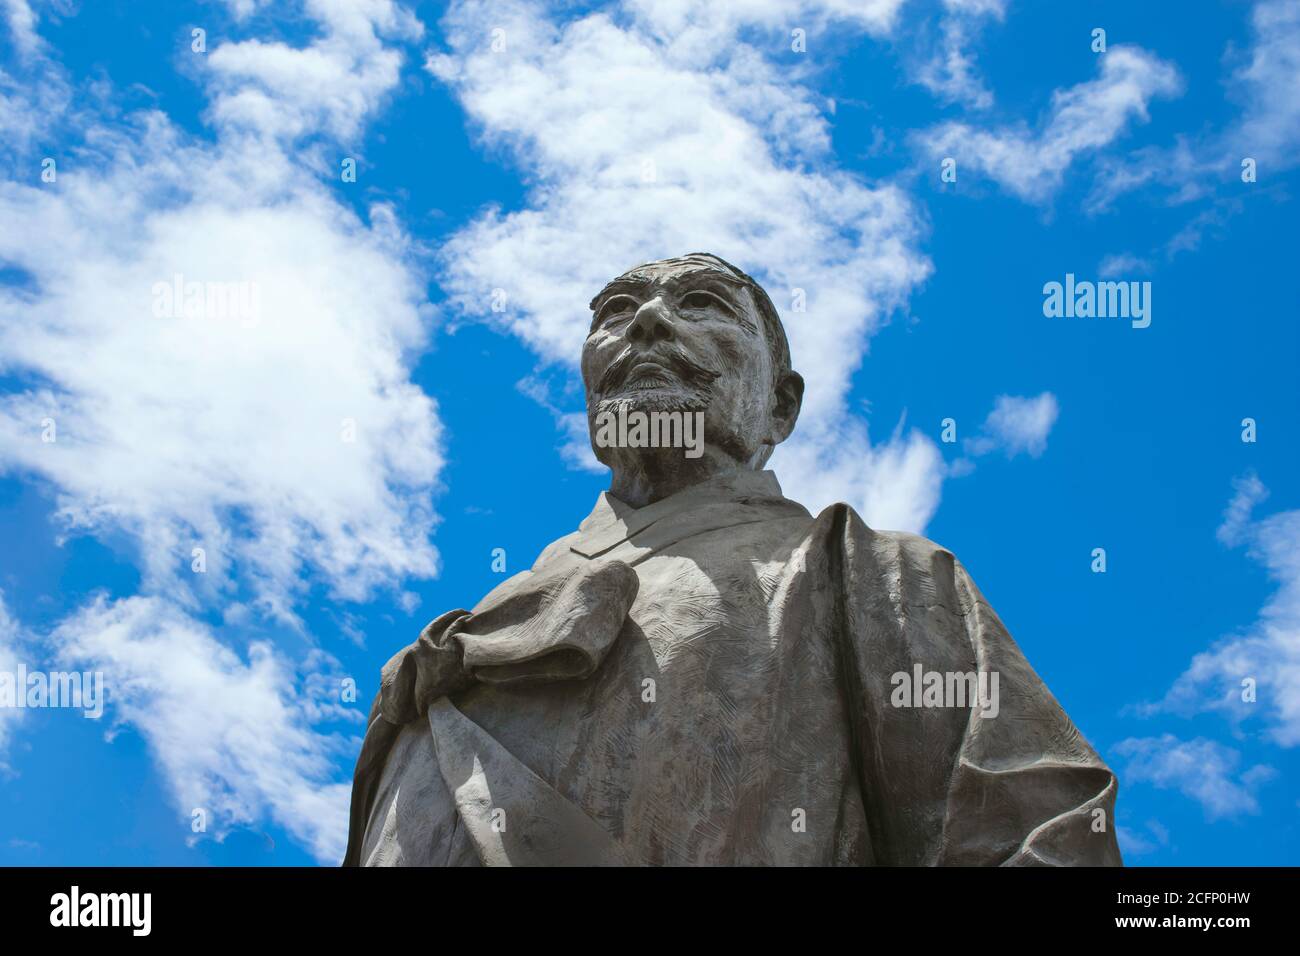 Statue of Kang Woo-kyu, an Korean independence fighter and martyr, at Seoul Station in South Korea. Stock Photo